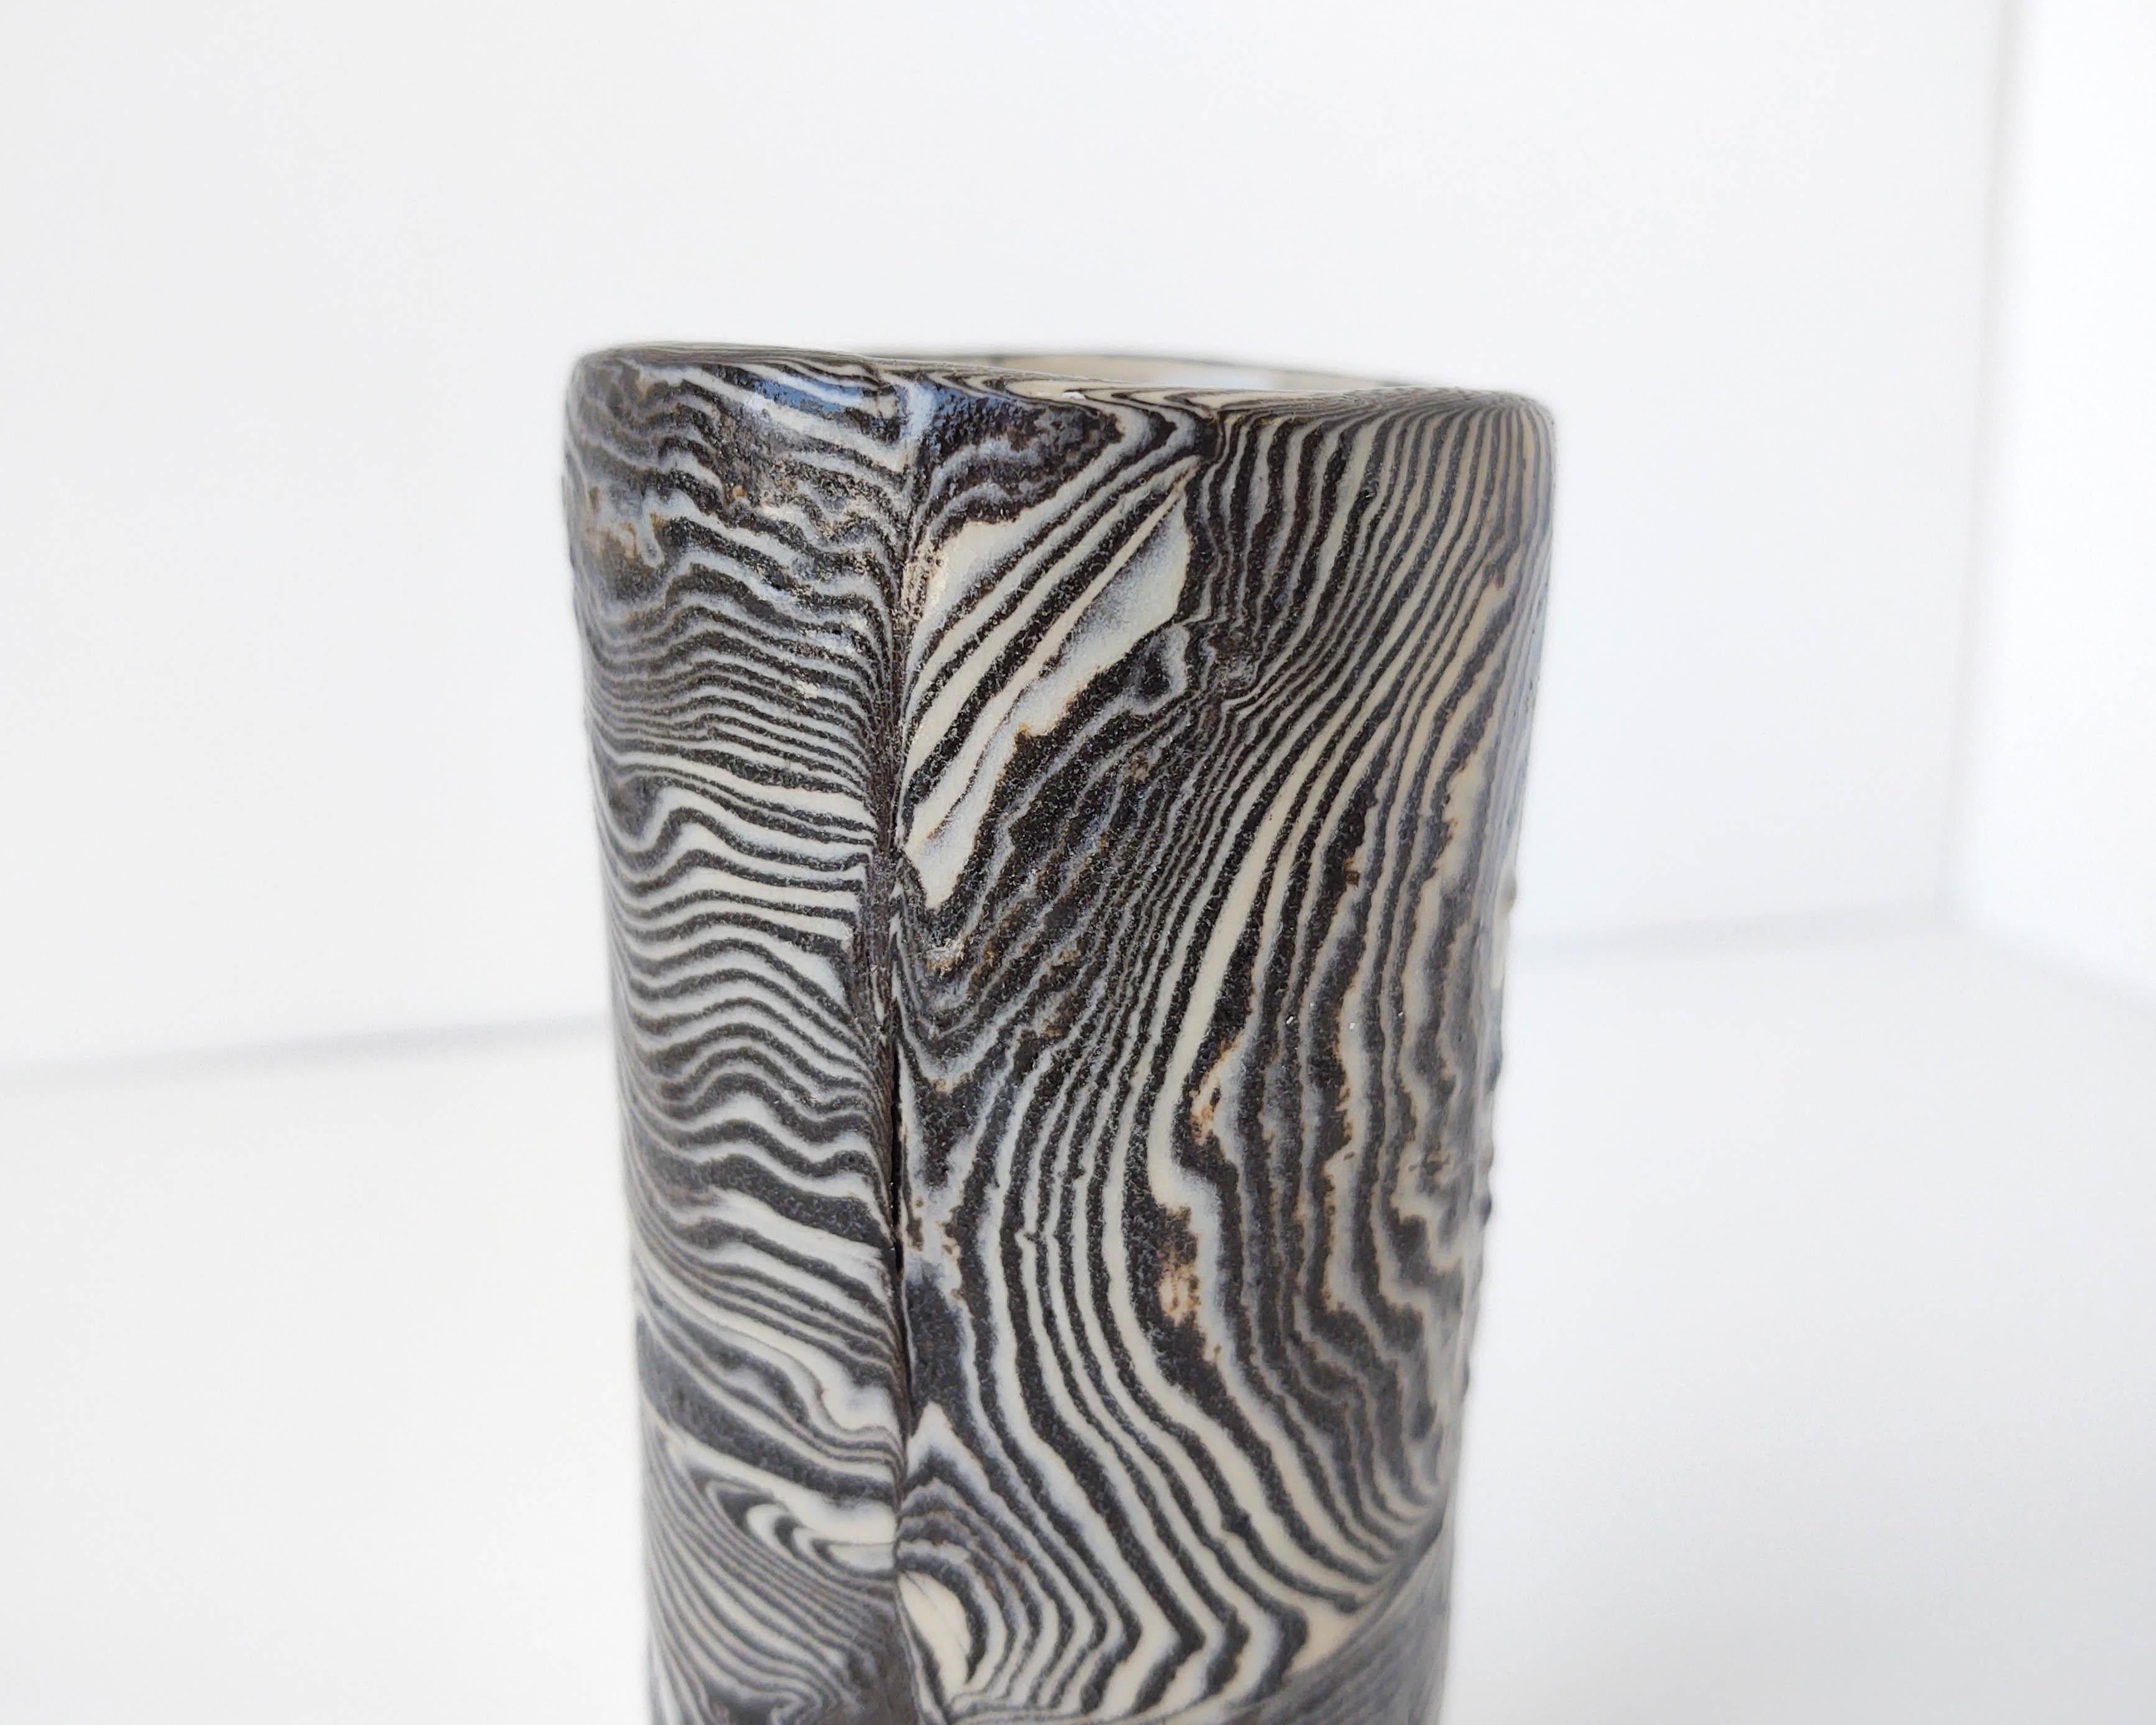 Hand-Crafted Handmade Small Psychedelic Nerikomi Black and White Vase by Fizzy Ceramics